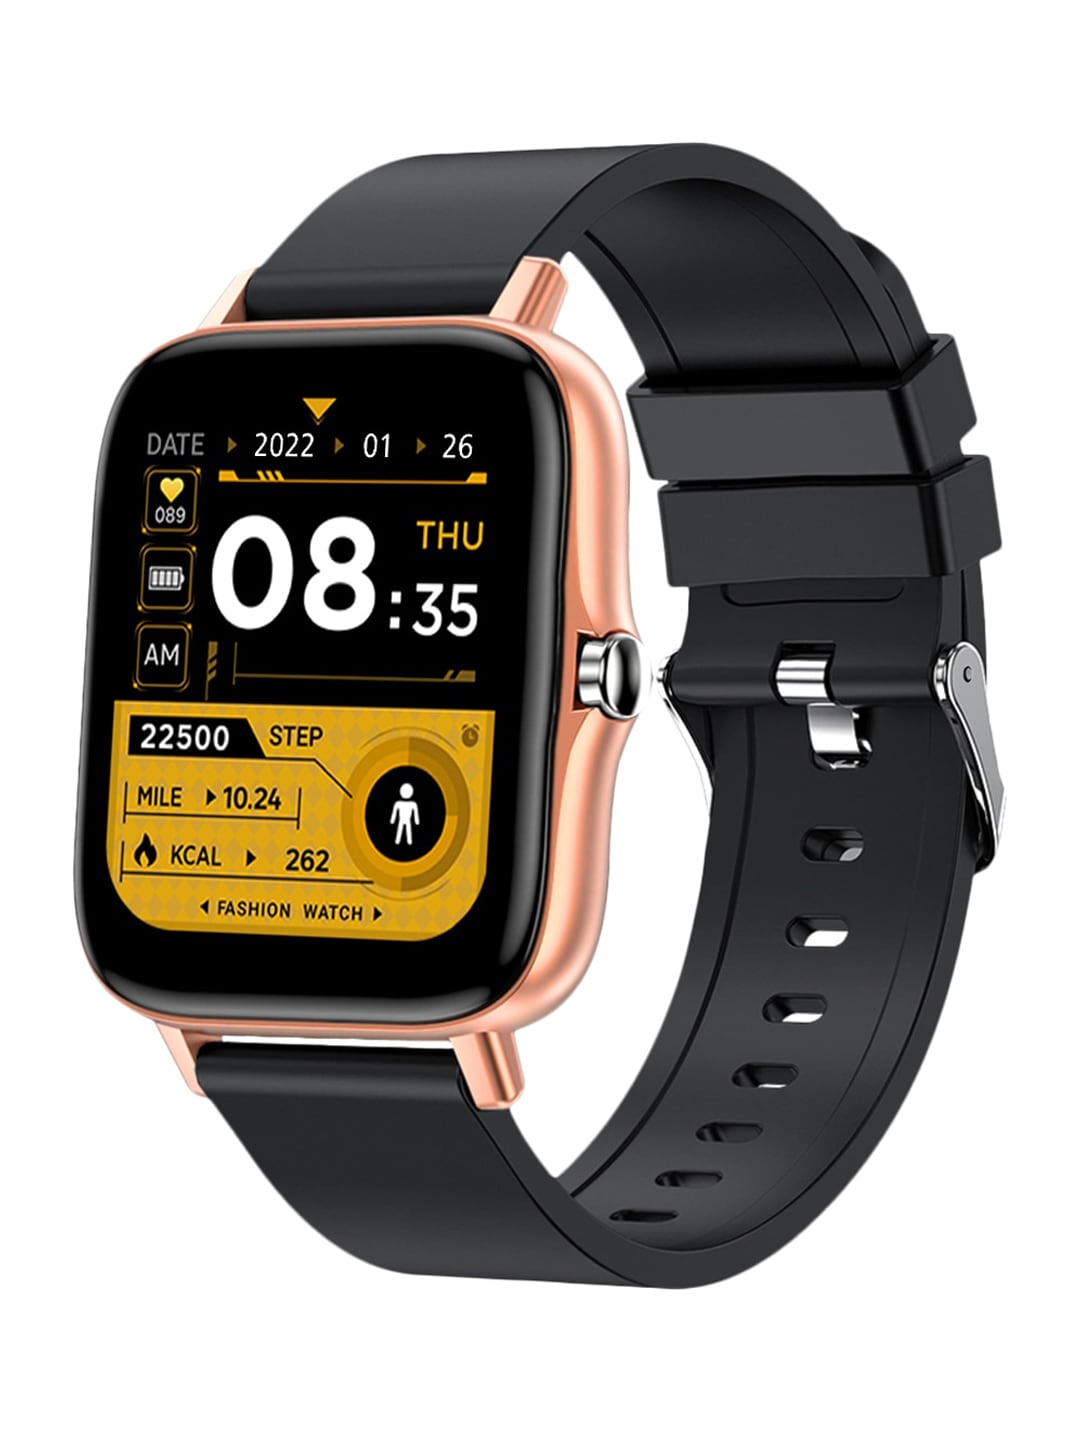 GIORDANO Adult Black & Rose Gold-Toned Smartwatch R6-W31-04-Rose Gold Price in India